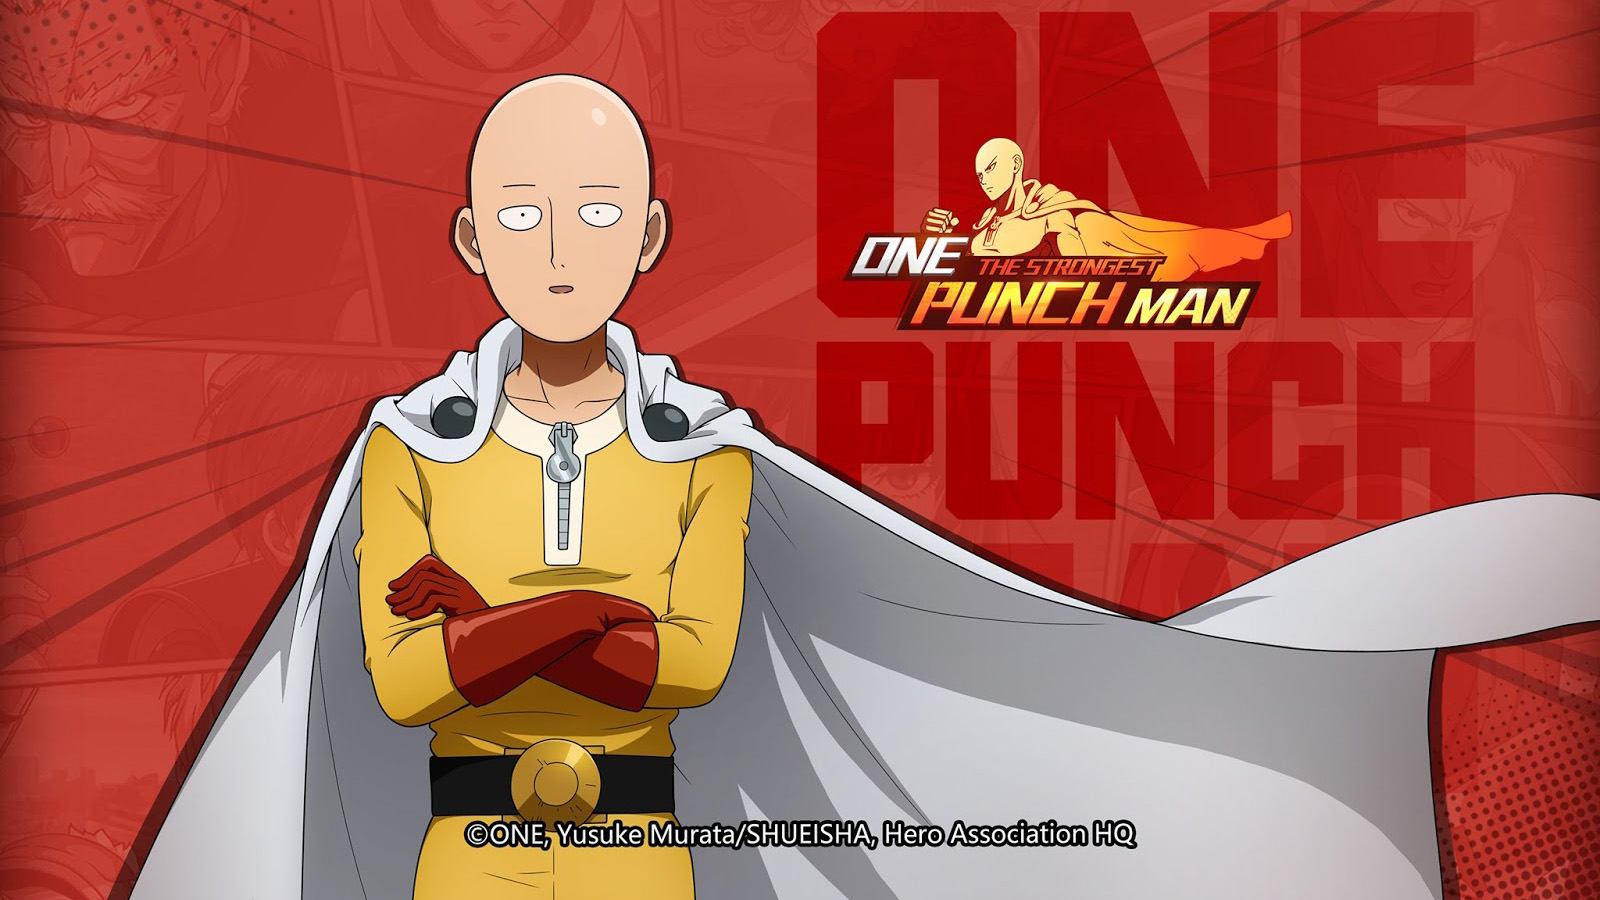 One-Punch Man season 2 finally has a trailer and a release date - Polygon